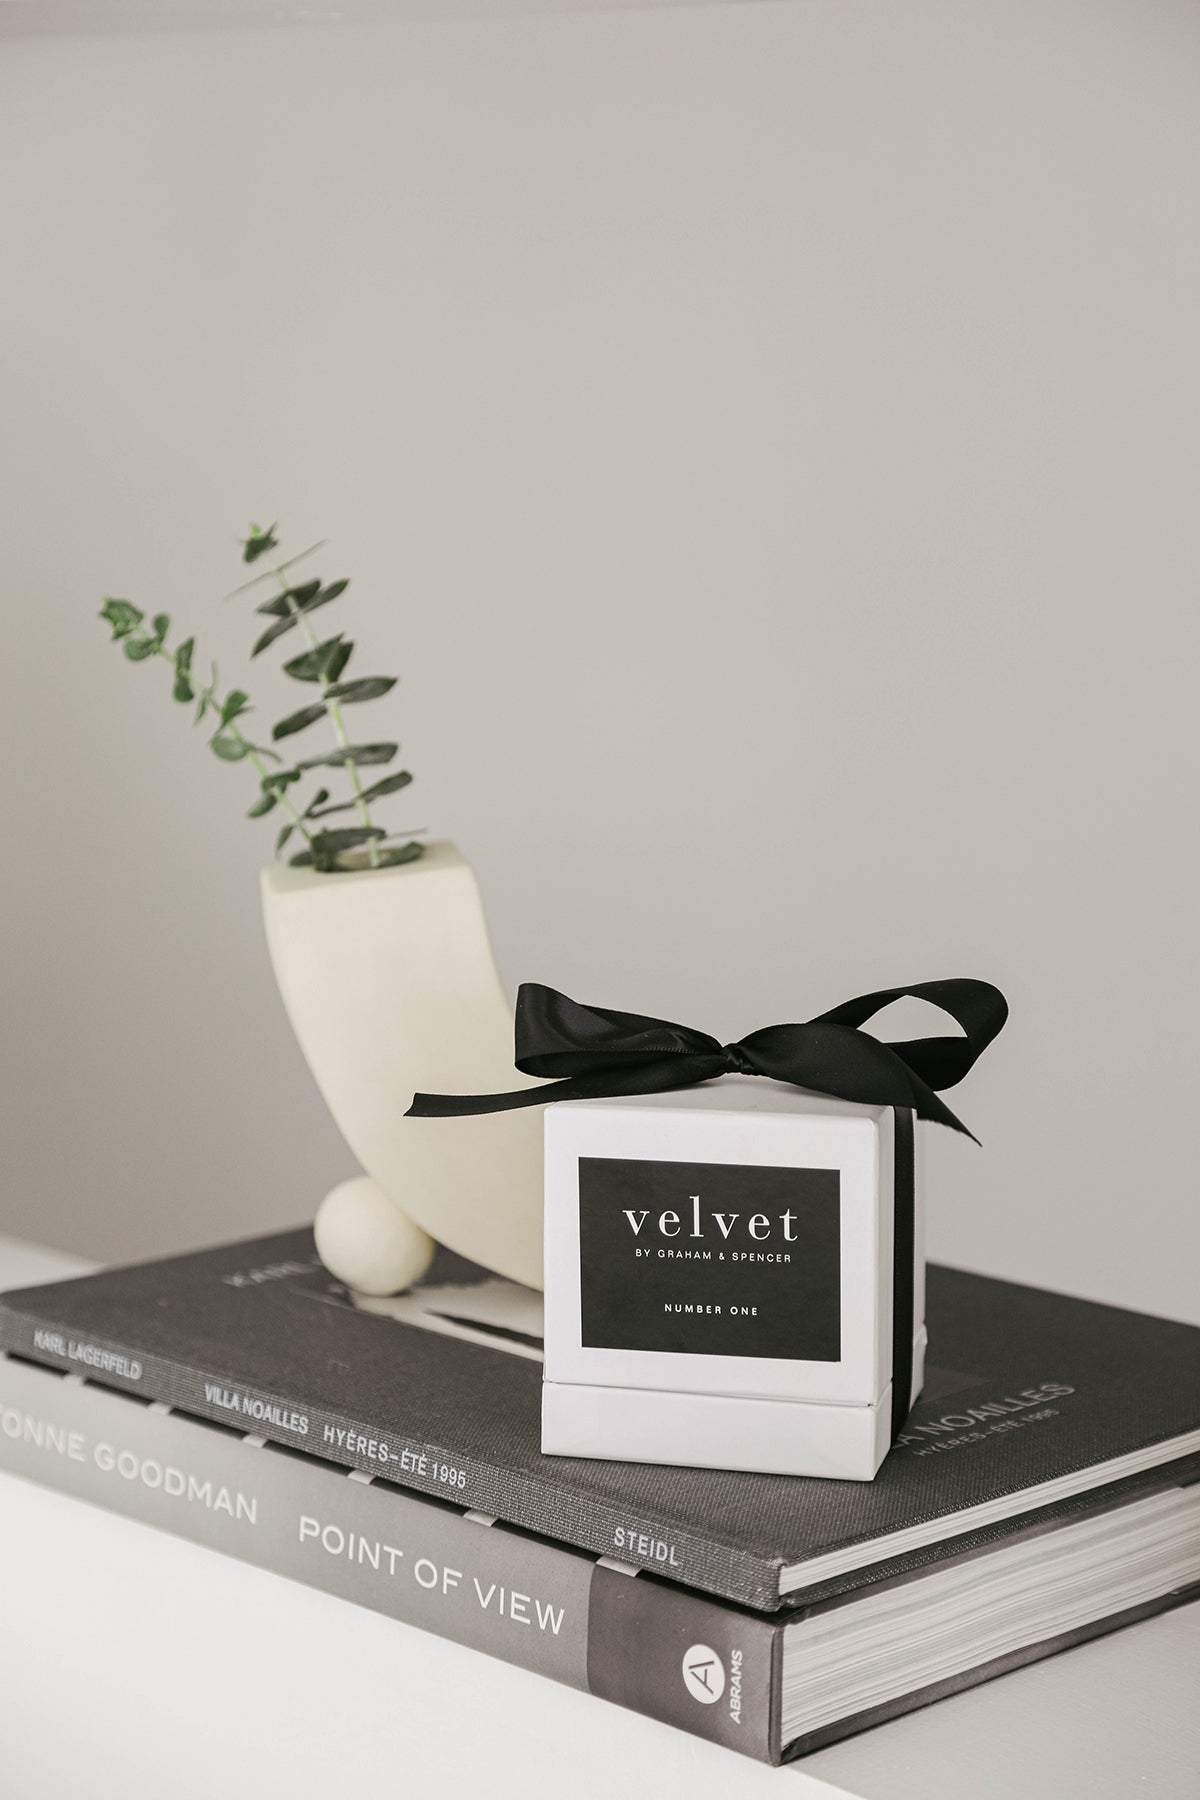   Number One Candle by Velvet in Box on Display 